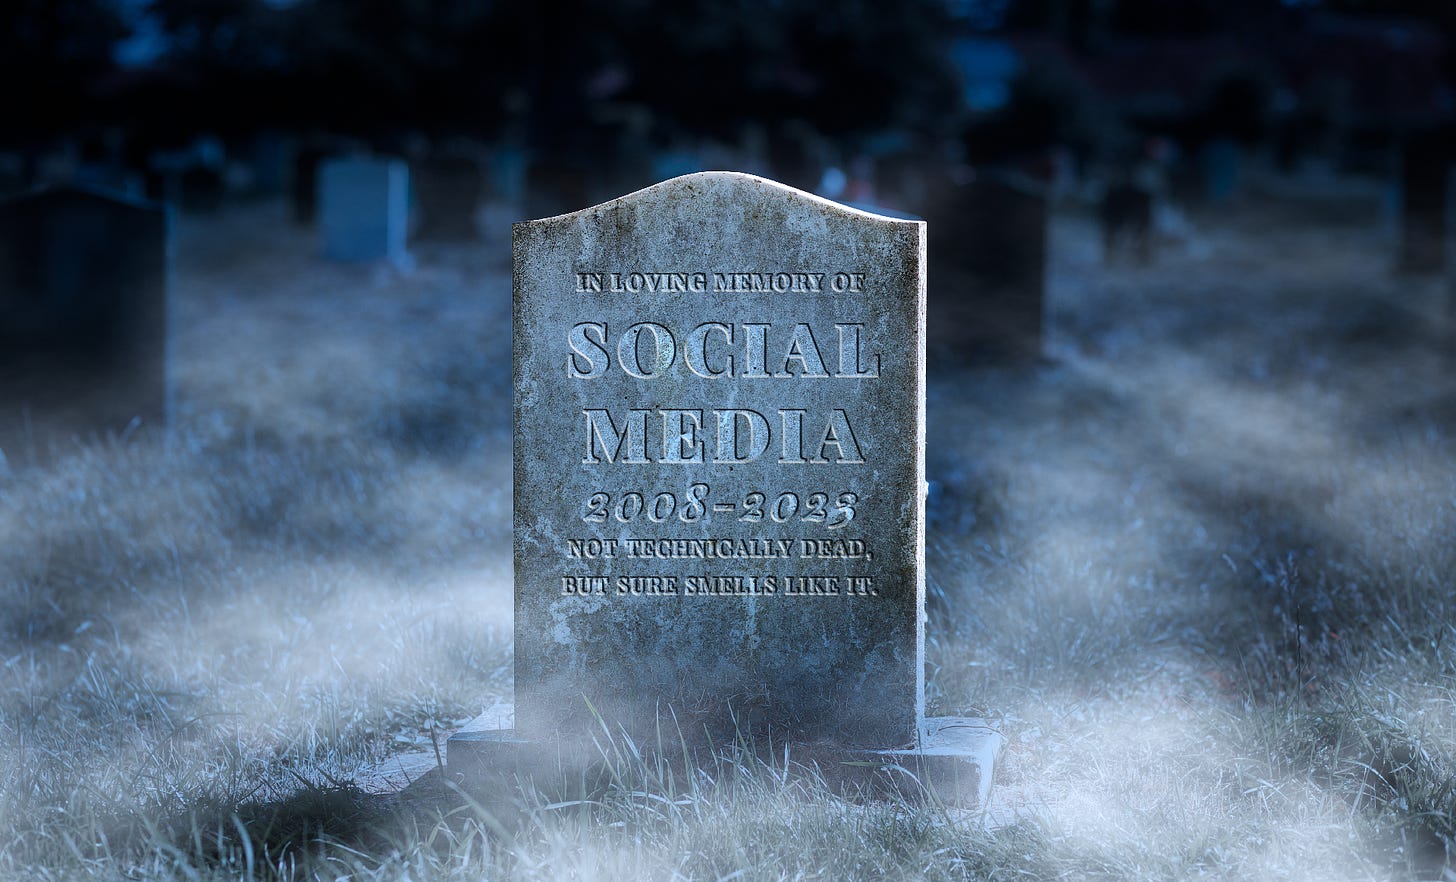 A graveyard in the cold winter moonlight. headstone reads "IN LOVING MEMORY OF SOCIAL MEDIA 2008-2023. NOT TECHNICALLY DEAD, BUT SURE SMELLS LIKE IT". Cold mist crawls across the frozen ground and the whole thing is hella spooky.